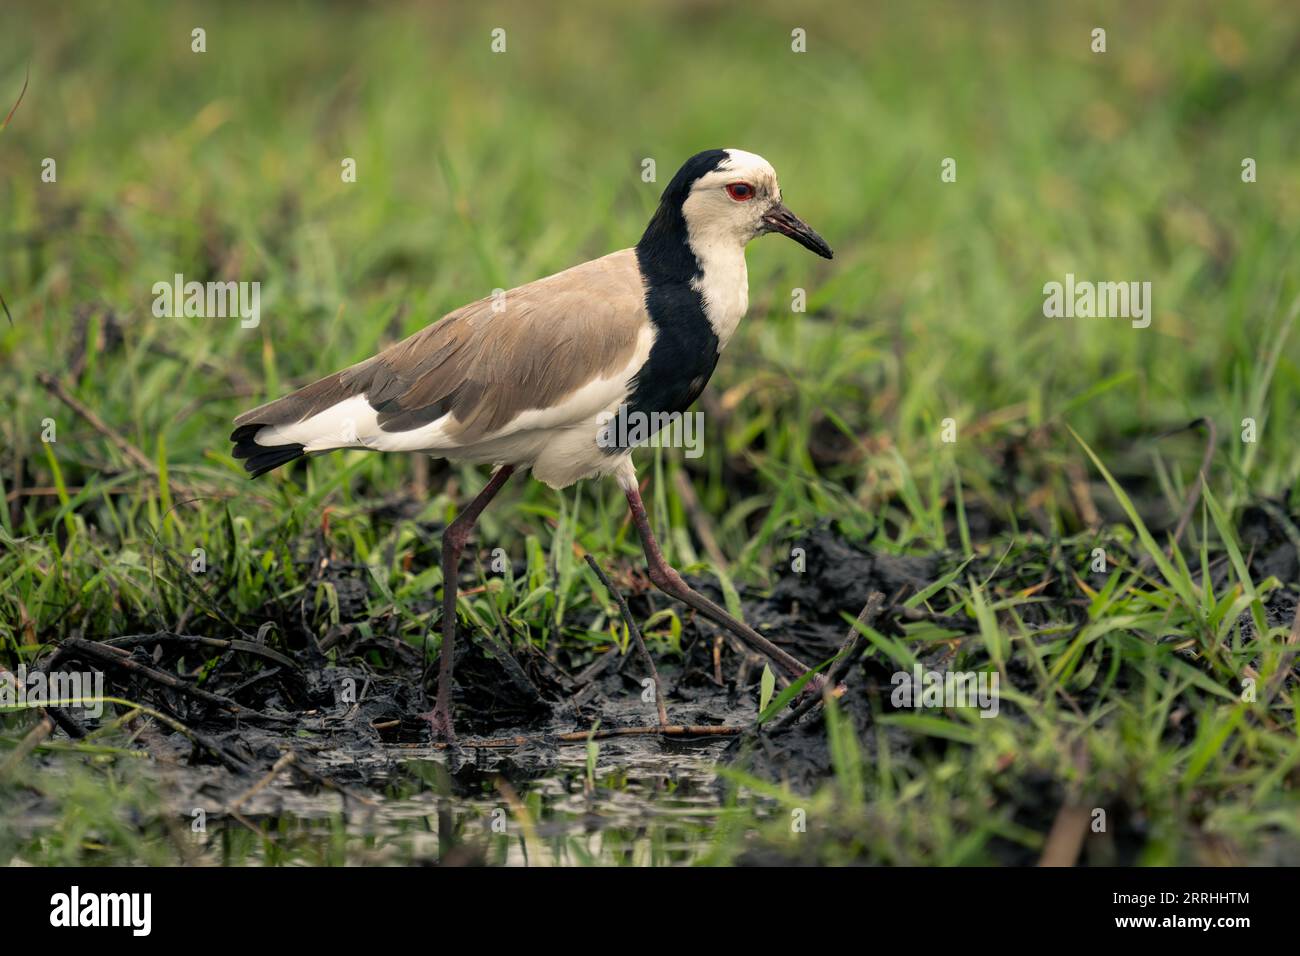 Long-toed lapwing crosses muddy shallows in grass Stock Photo